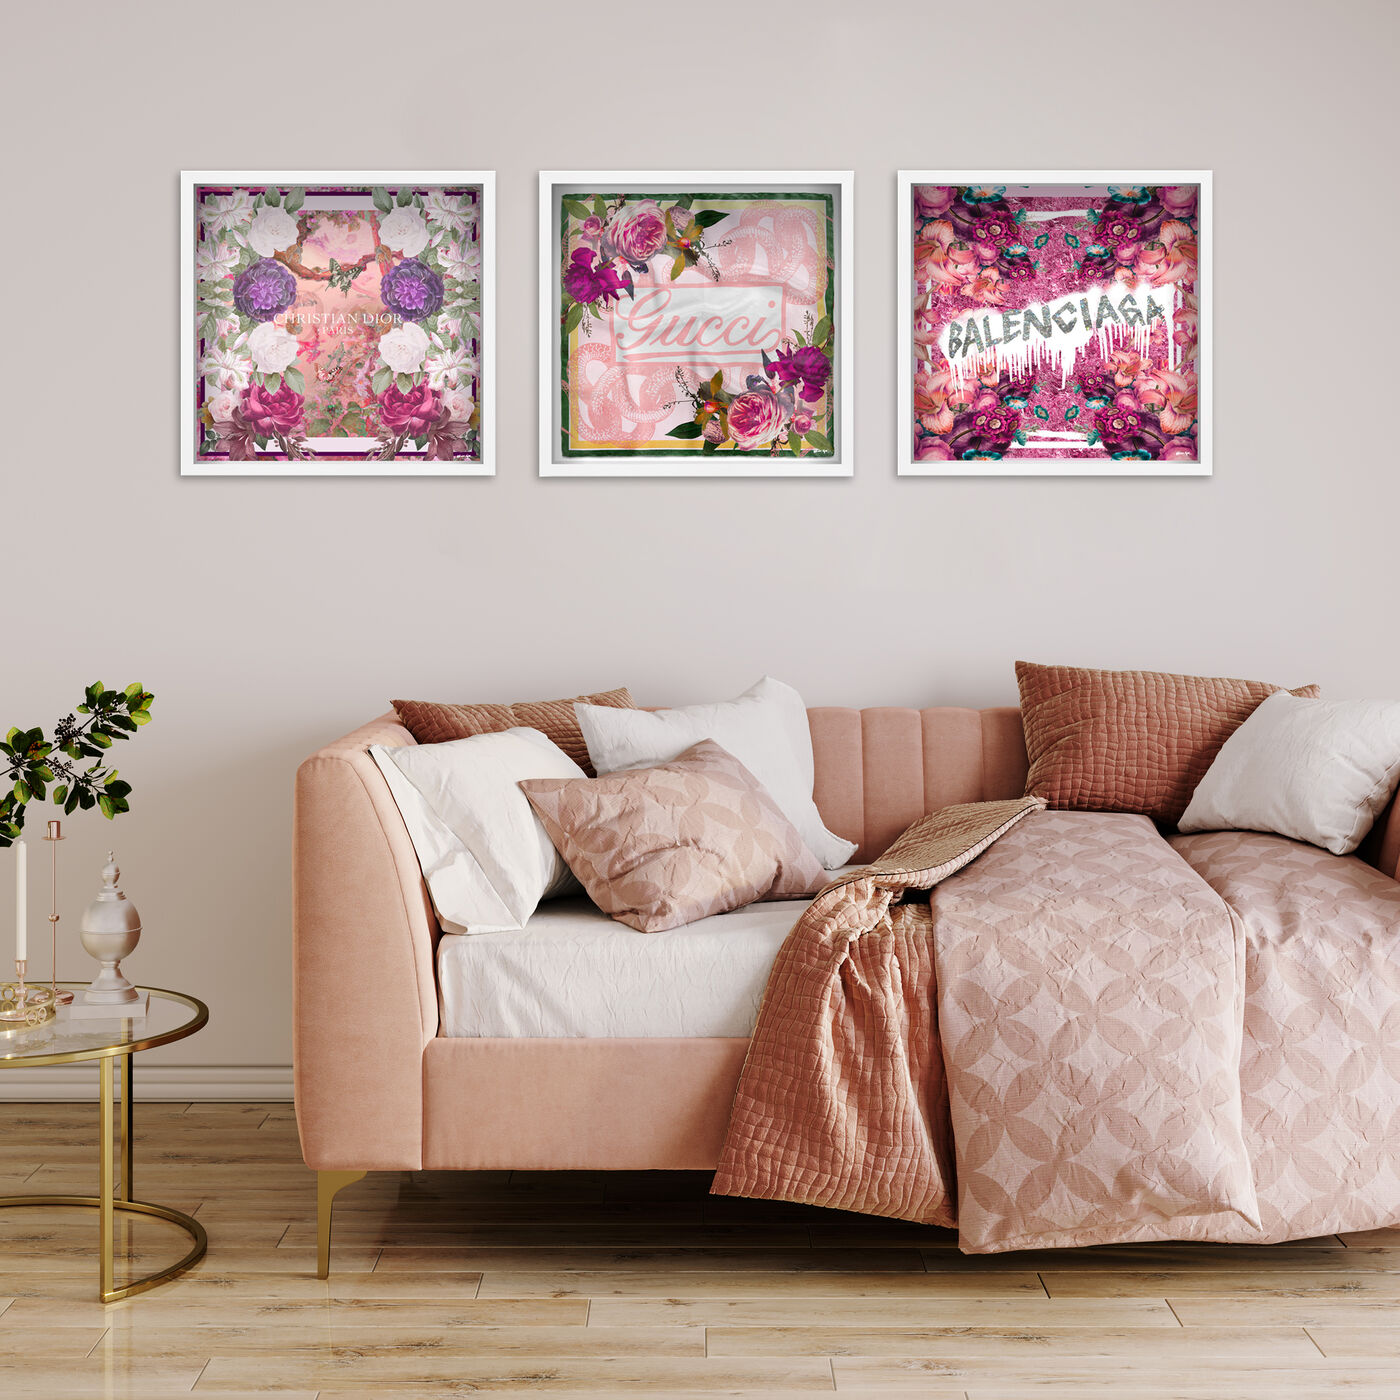 Pink Cube Floral Set of 3 - Displayed in a Shadowbox